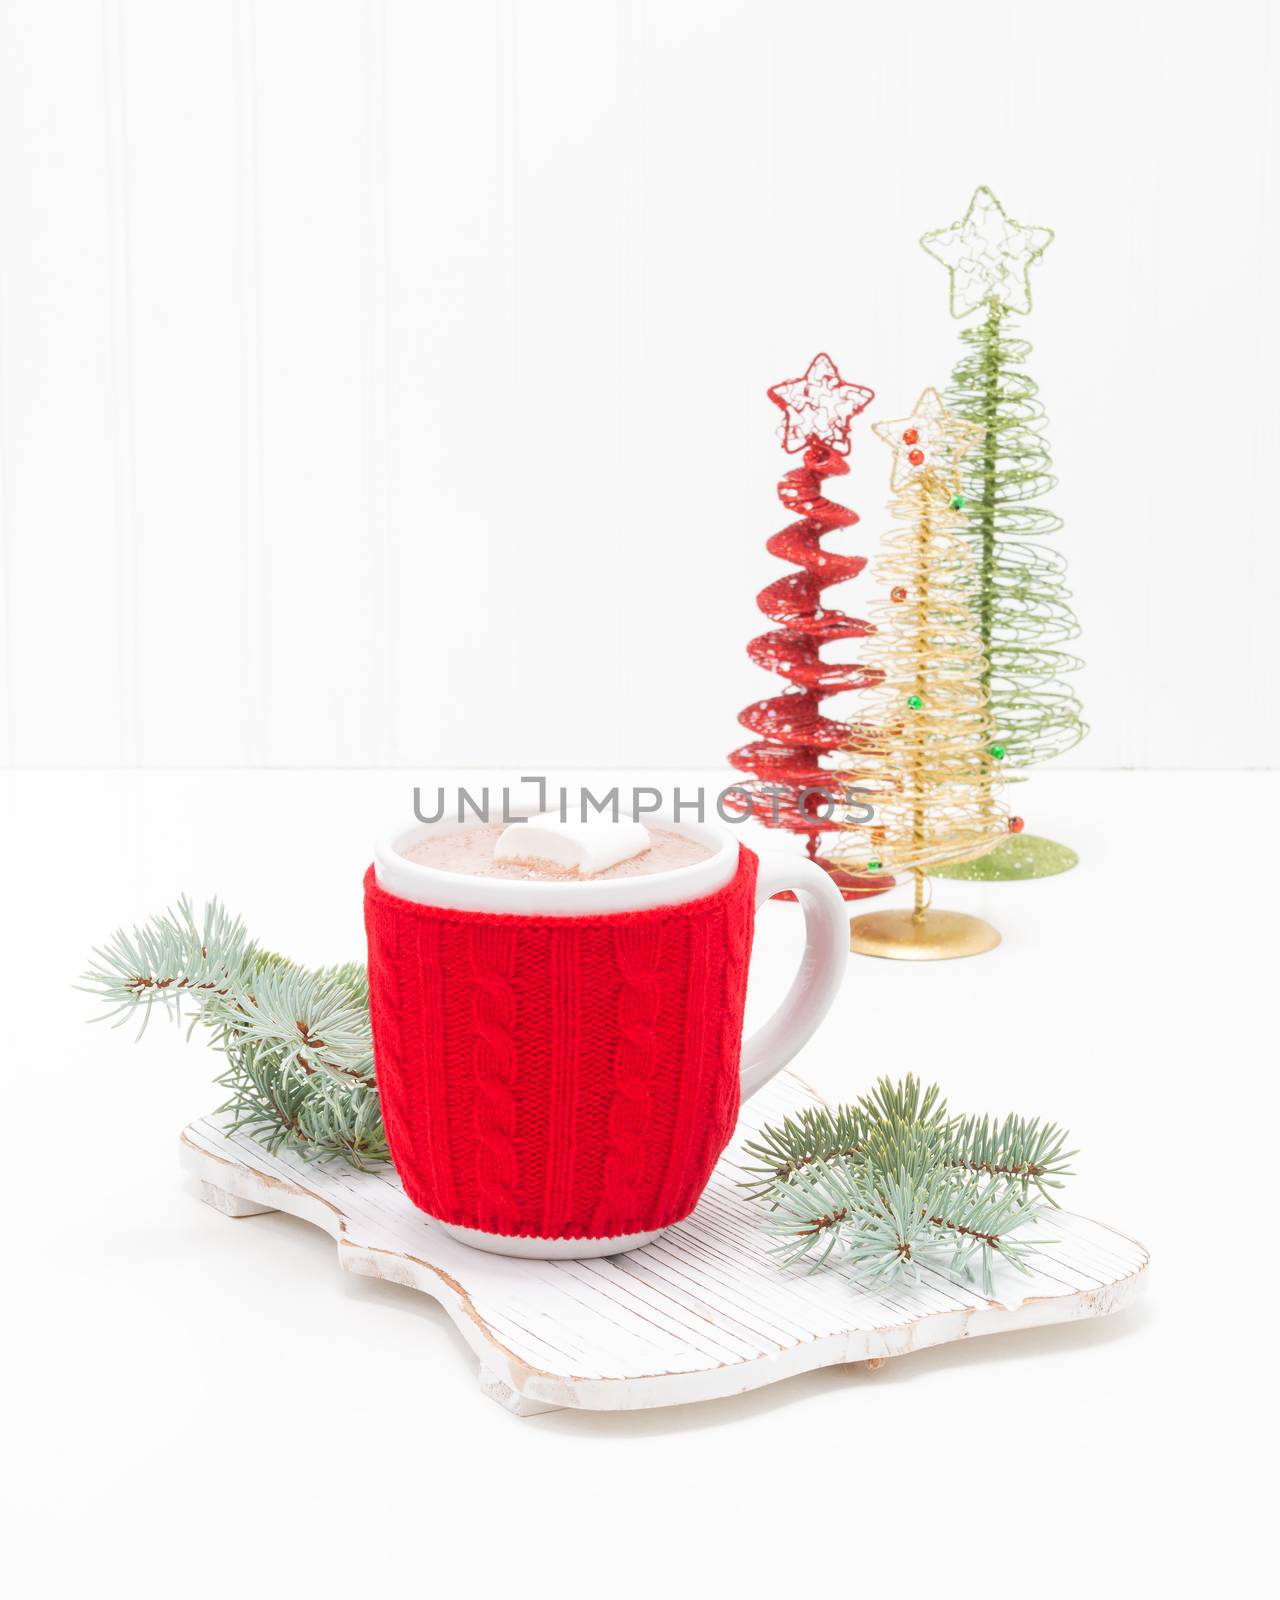 Hot chocolate in a white ceramic cup with a red cozy to keep it warm.